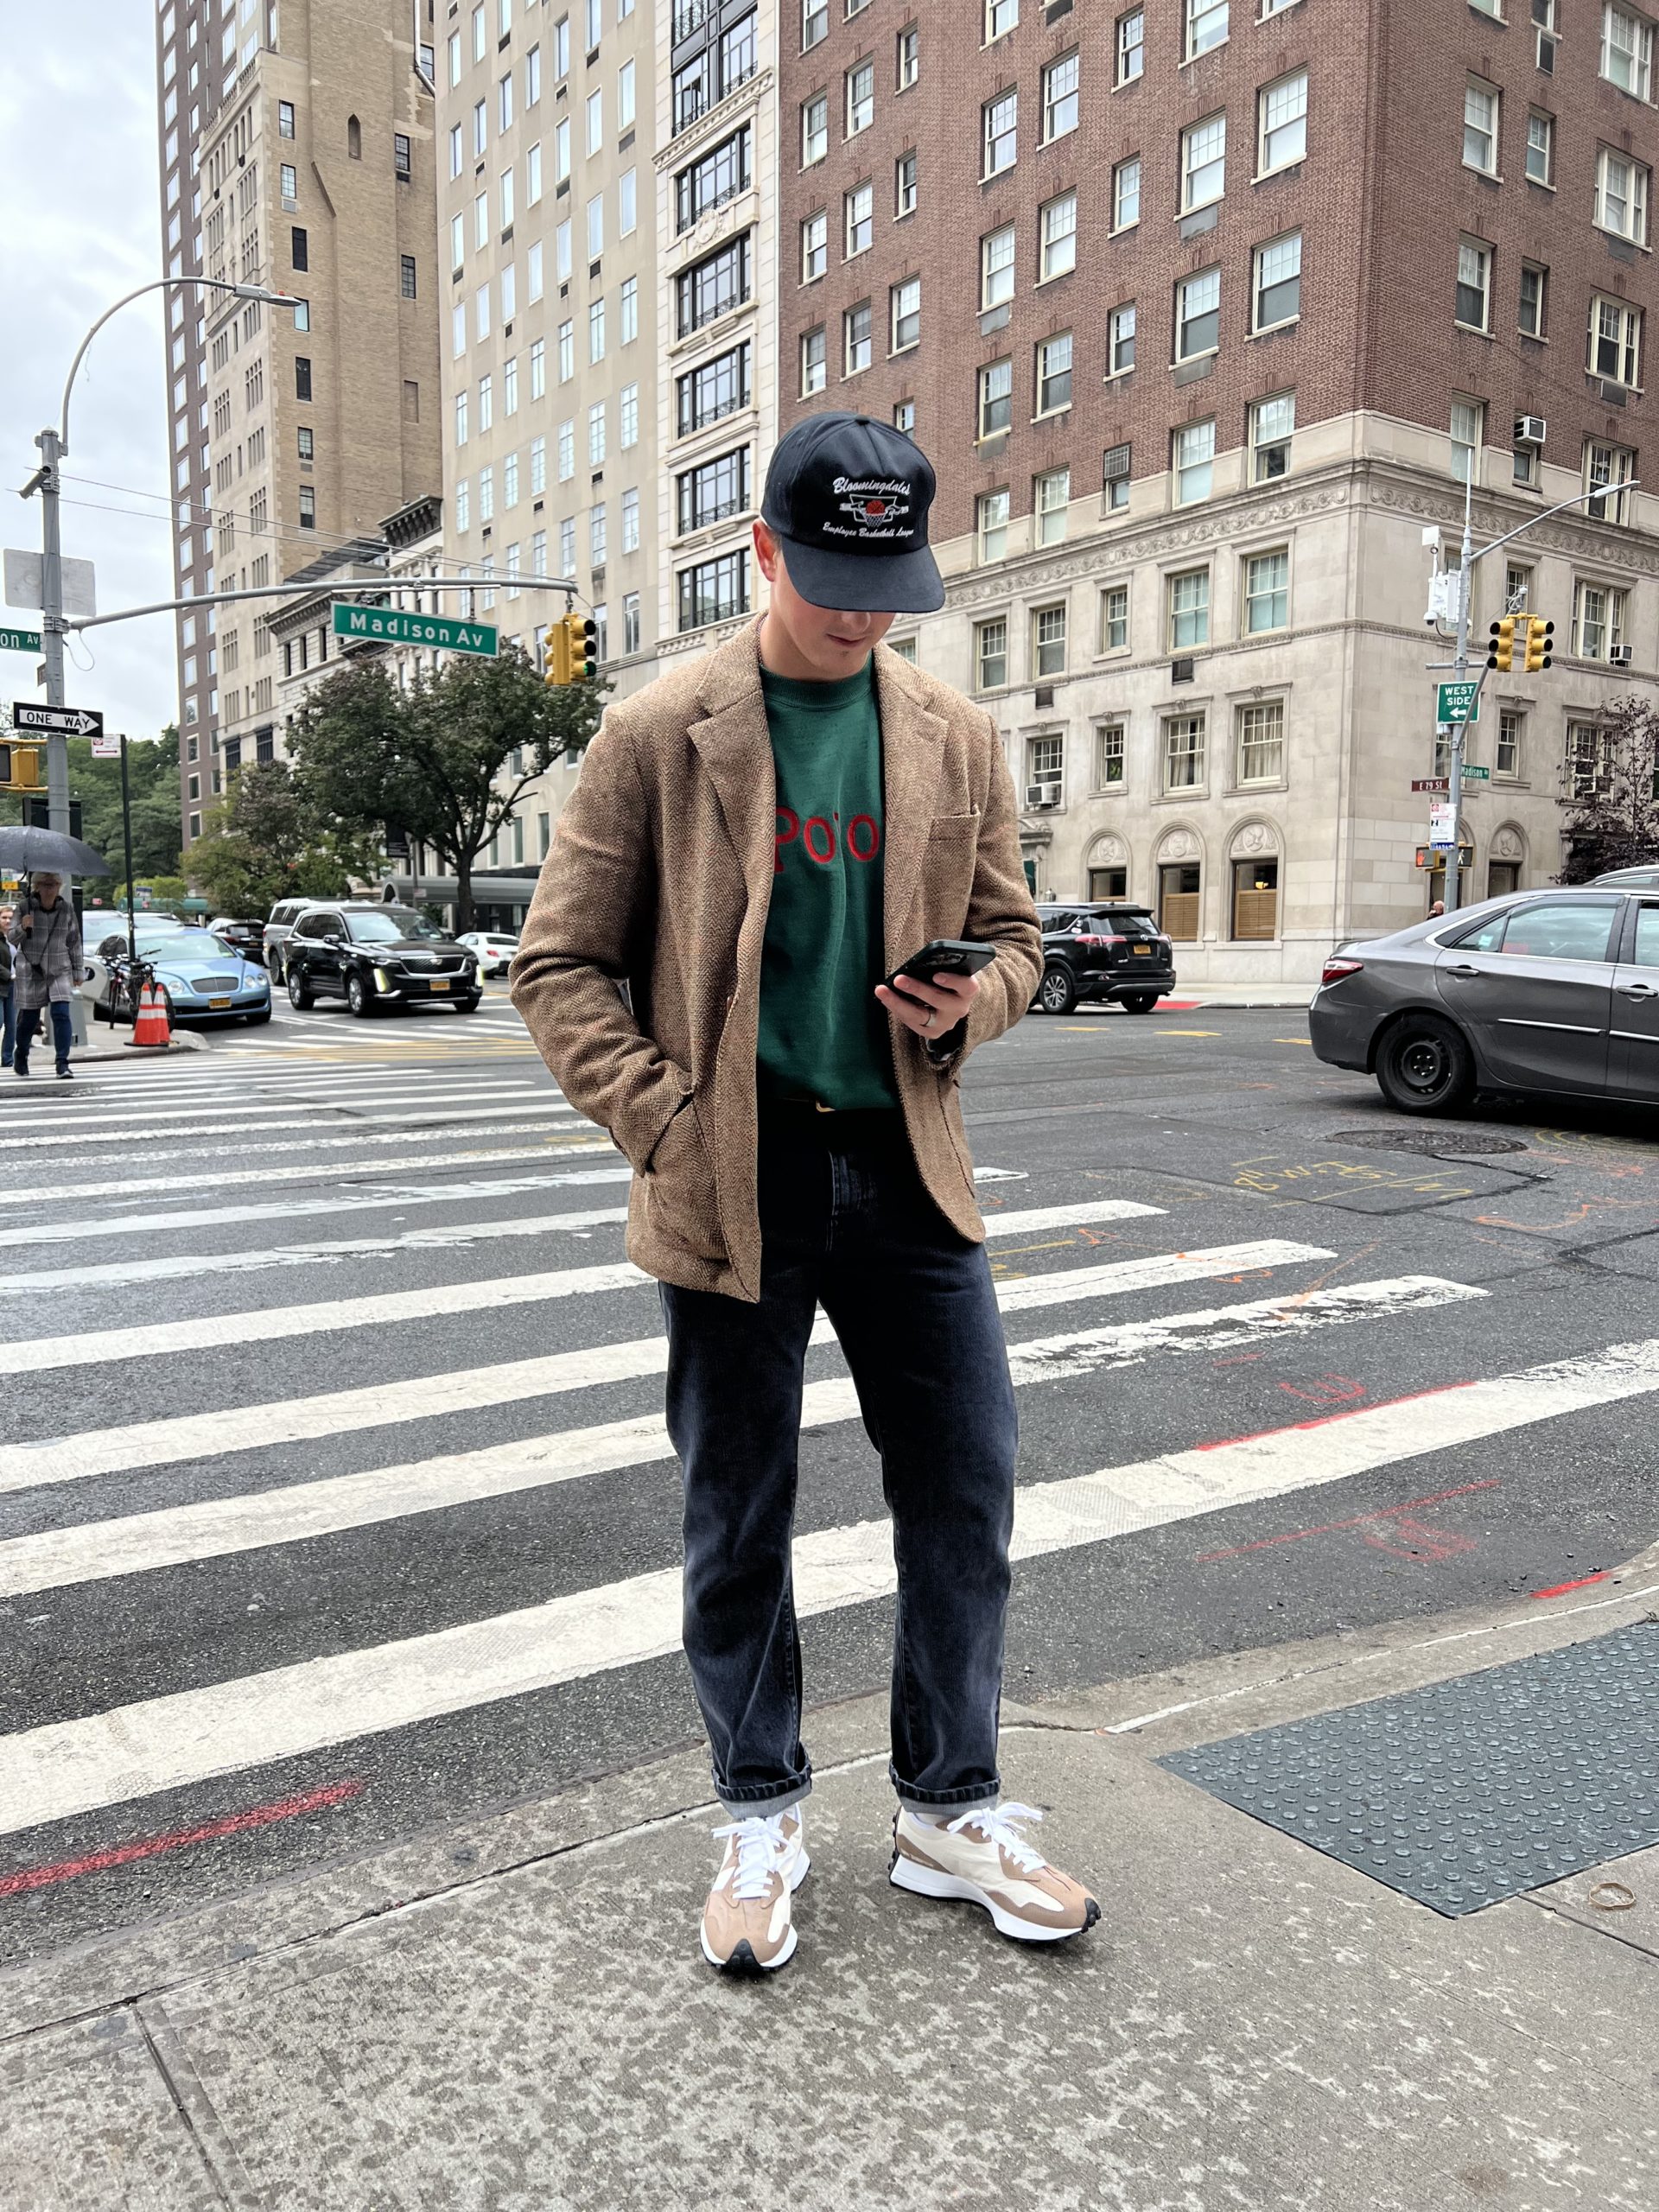 Nathan standing on a street corner in New York City.